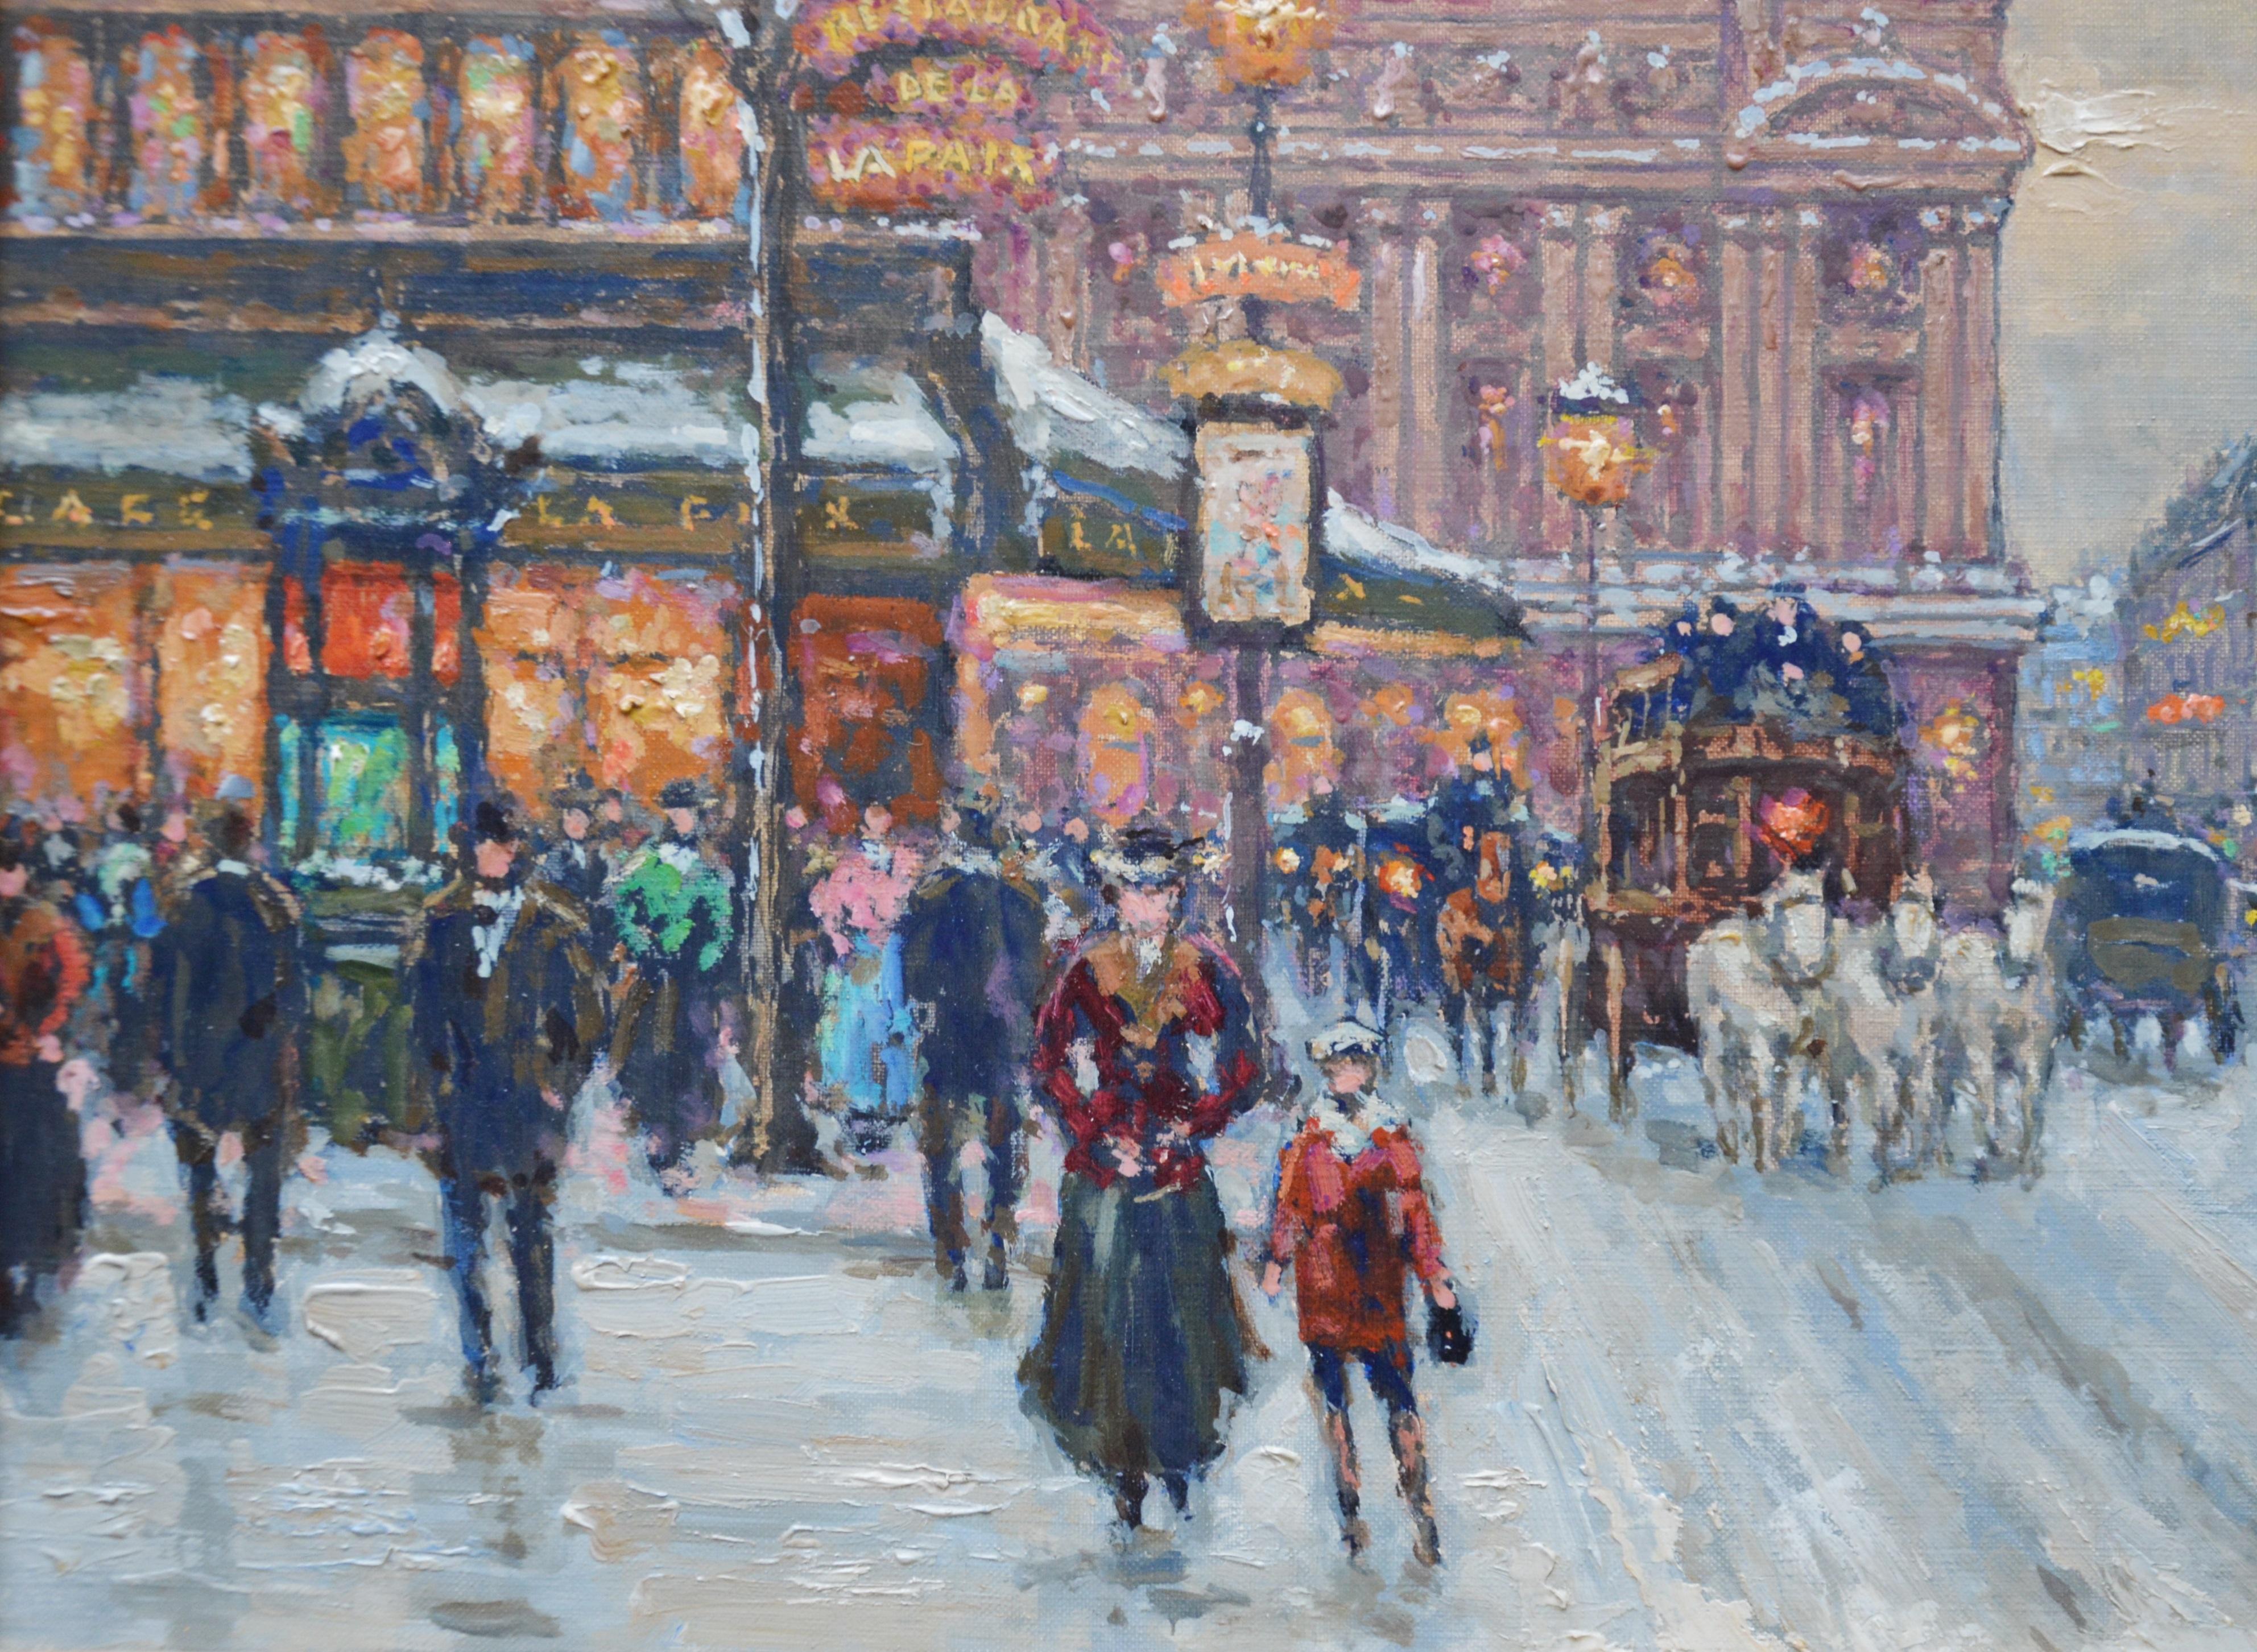 L'Opera sur la Neige - Post Impressionist Oil Painting Scene of 1930s Paris  - Gray Figurative Painting by Andre Boyer 